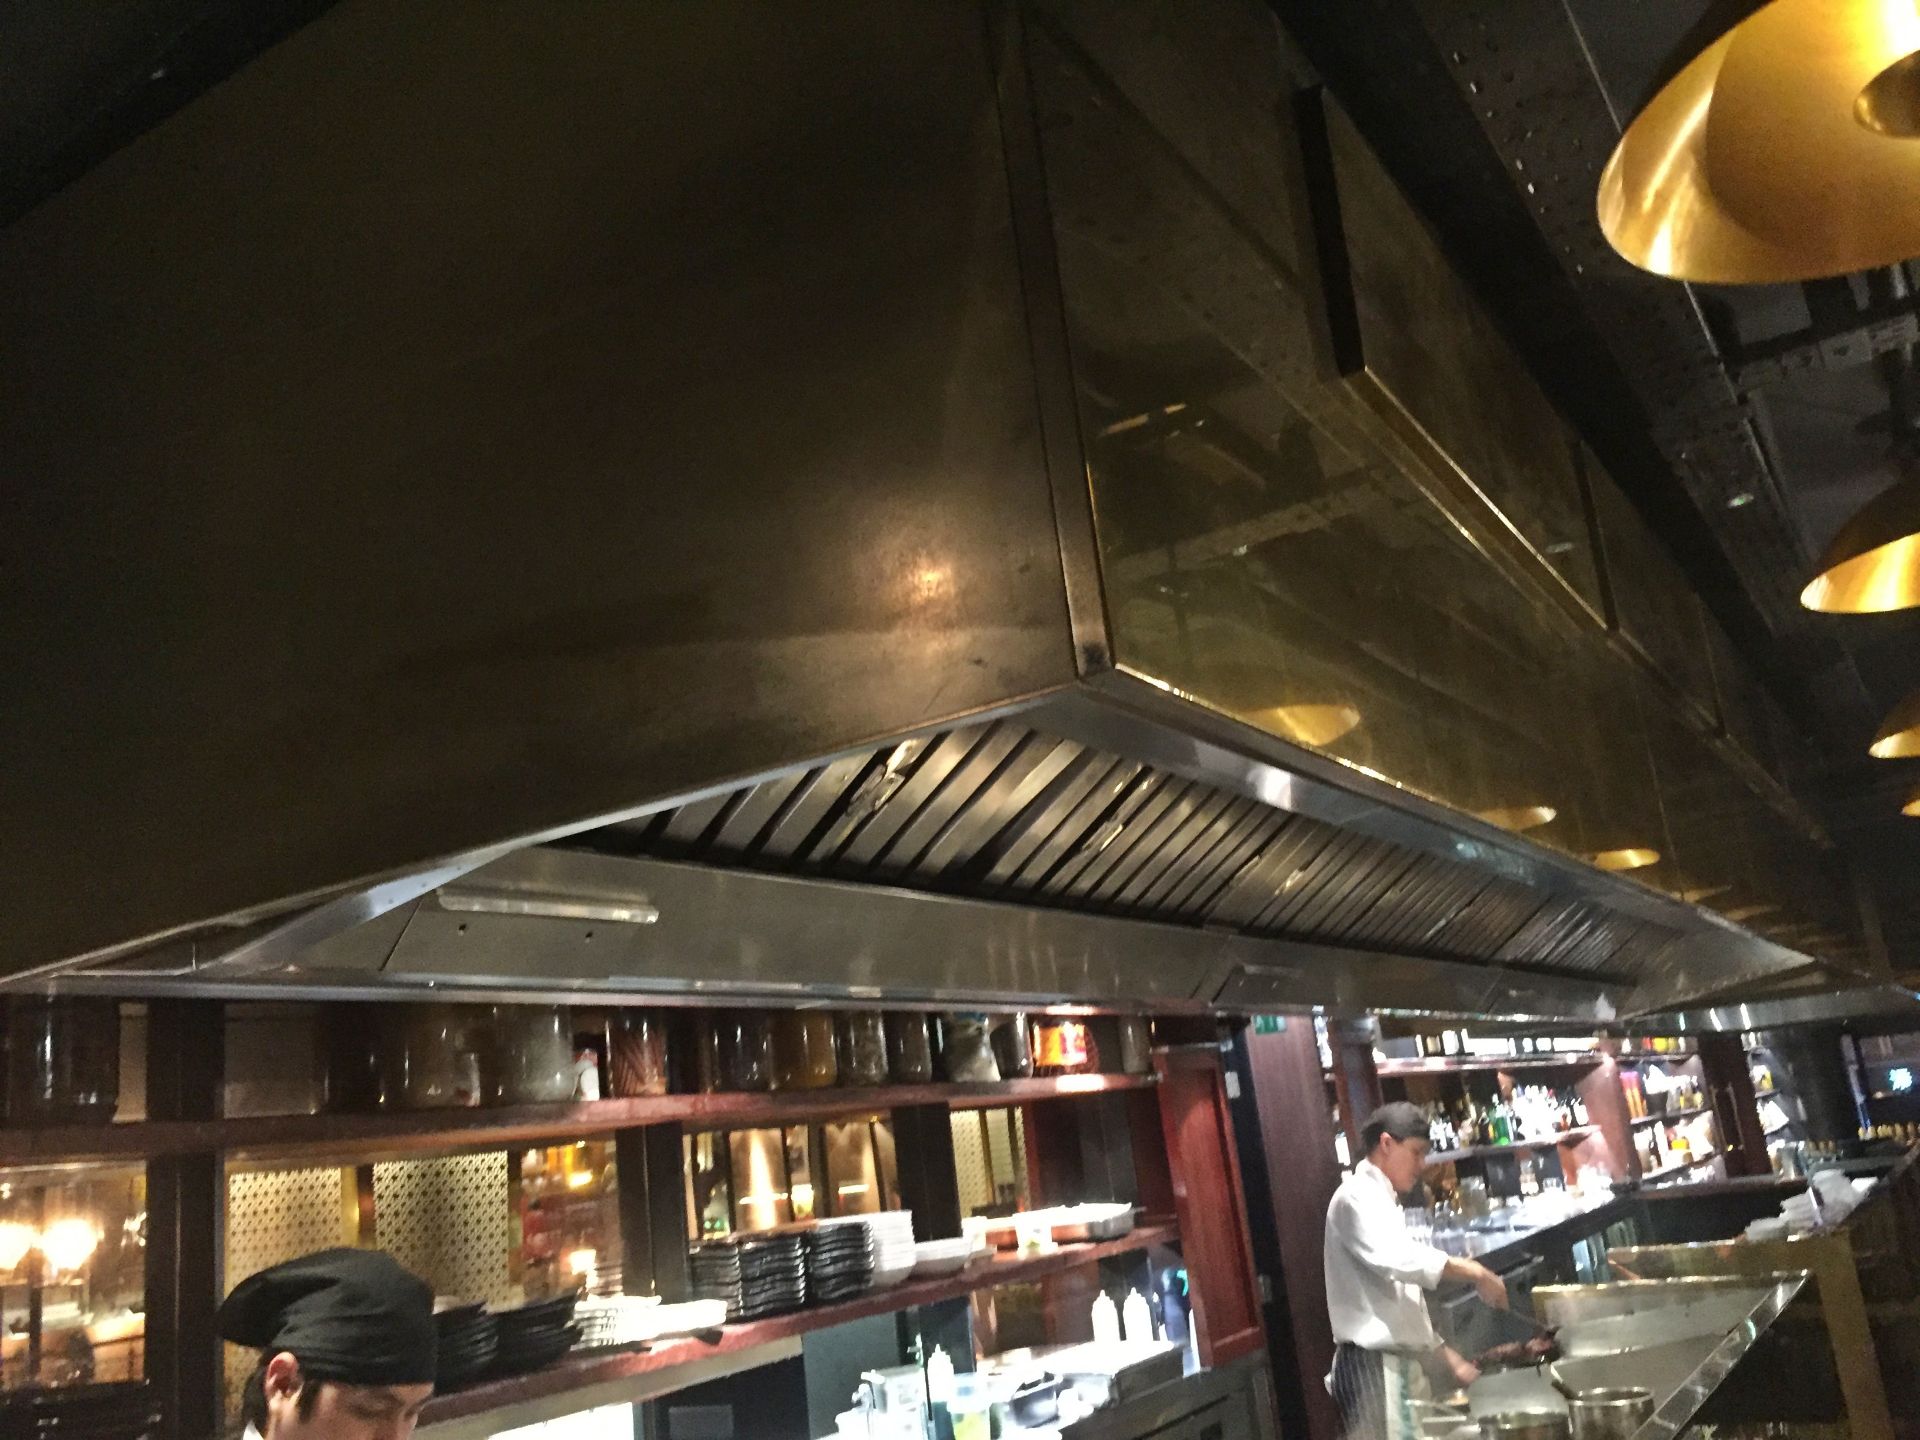 1 x Large Rectangular Shaped Dark Gold Metal Canopy Extractor Hood - Ideal for Open Kitchen area - Image 2 of 4